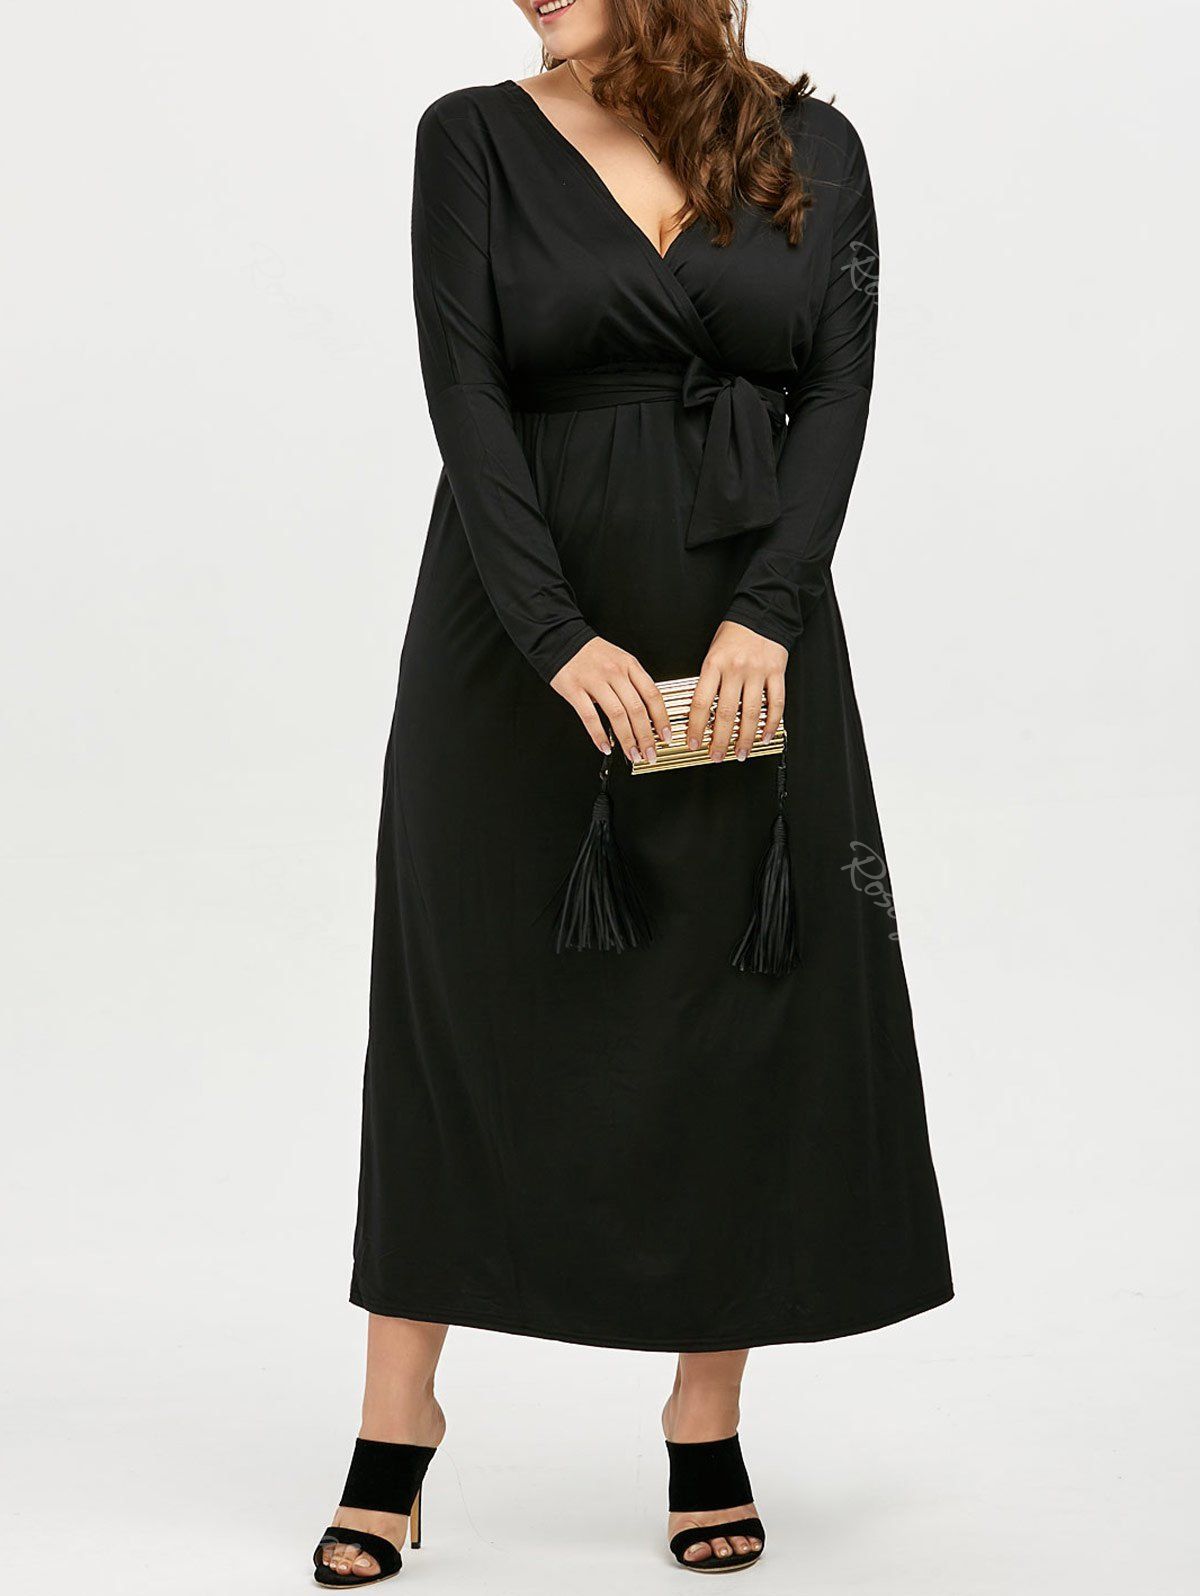 Buy Plus Size Deep V Neck Maxi Evening Dress with Long Sleeve  